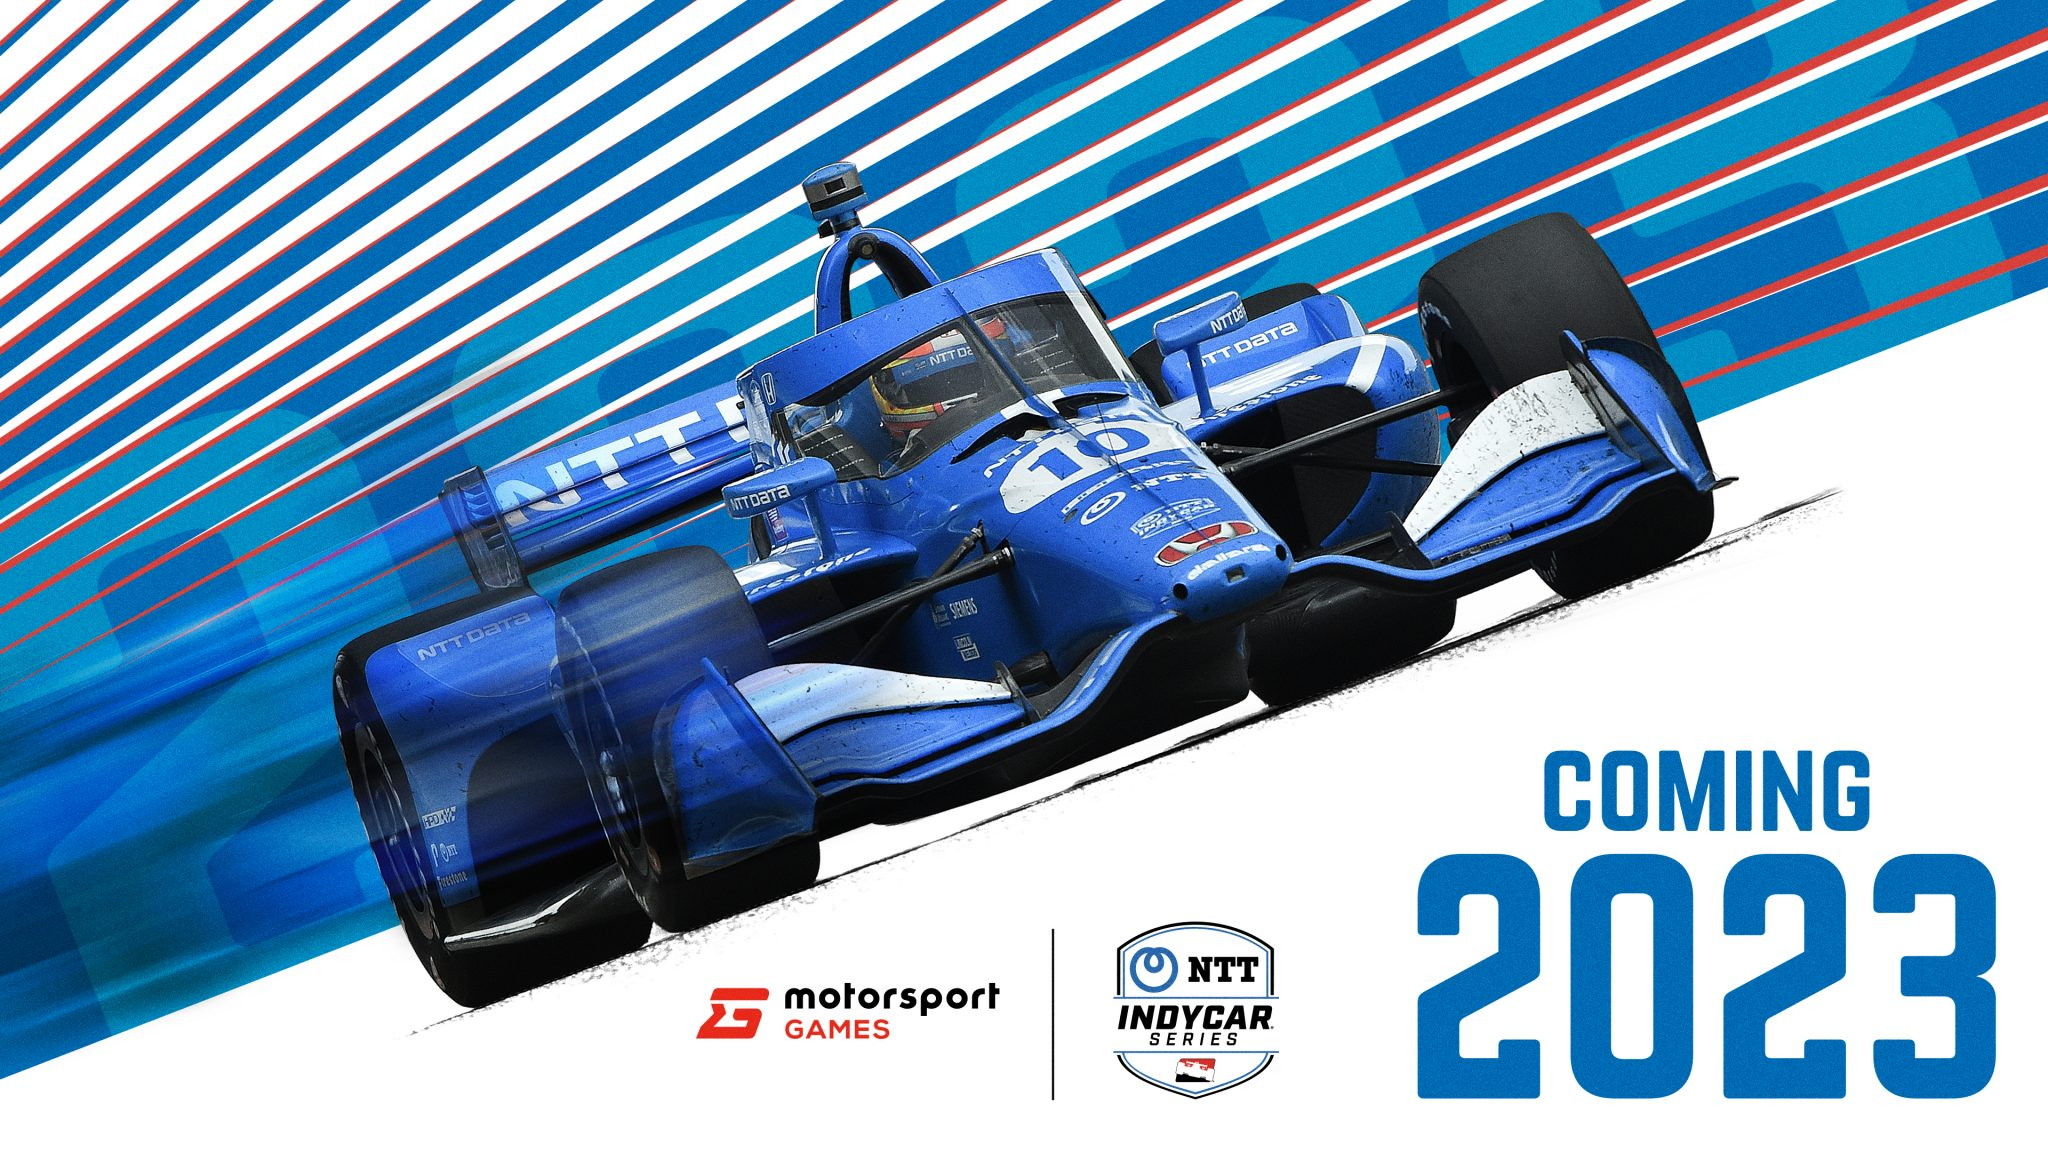 After Nearly Two Decades, IndyCar Is Finally Getting Its Own Game in